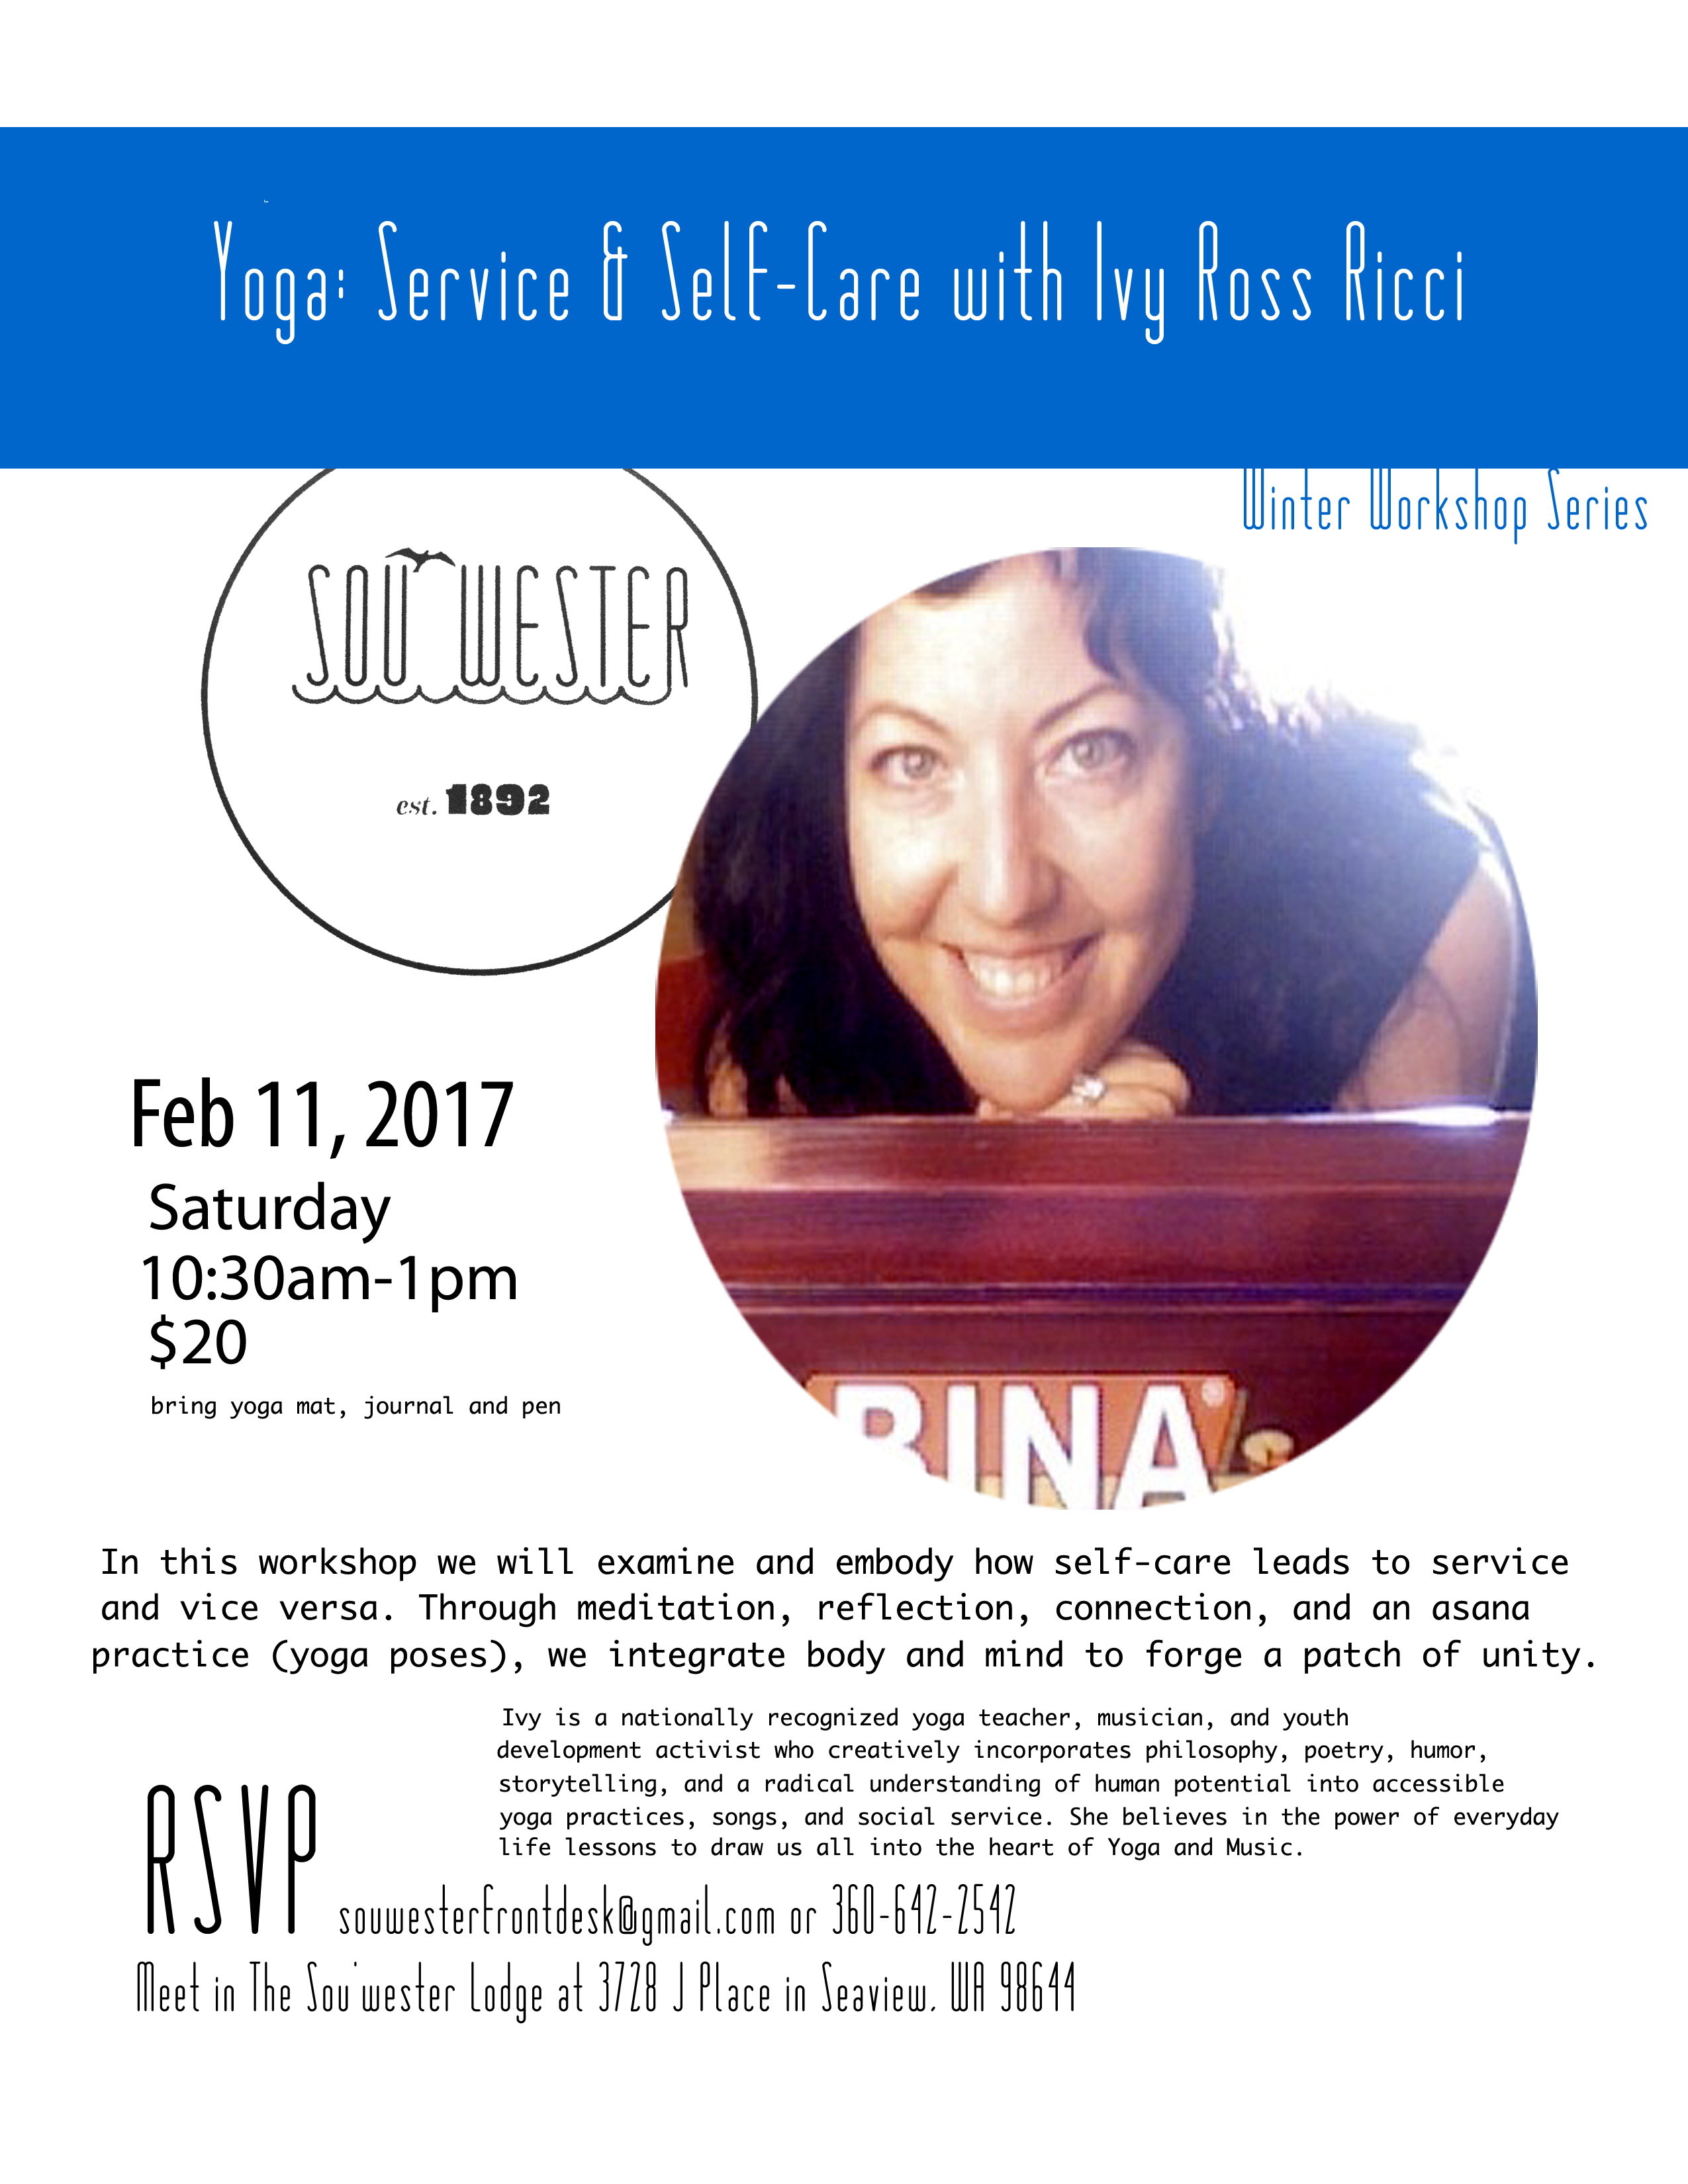 Yoga: Service & Self-Care with Ivy Ross Ricci